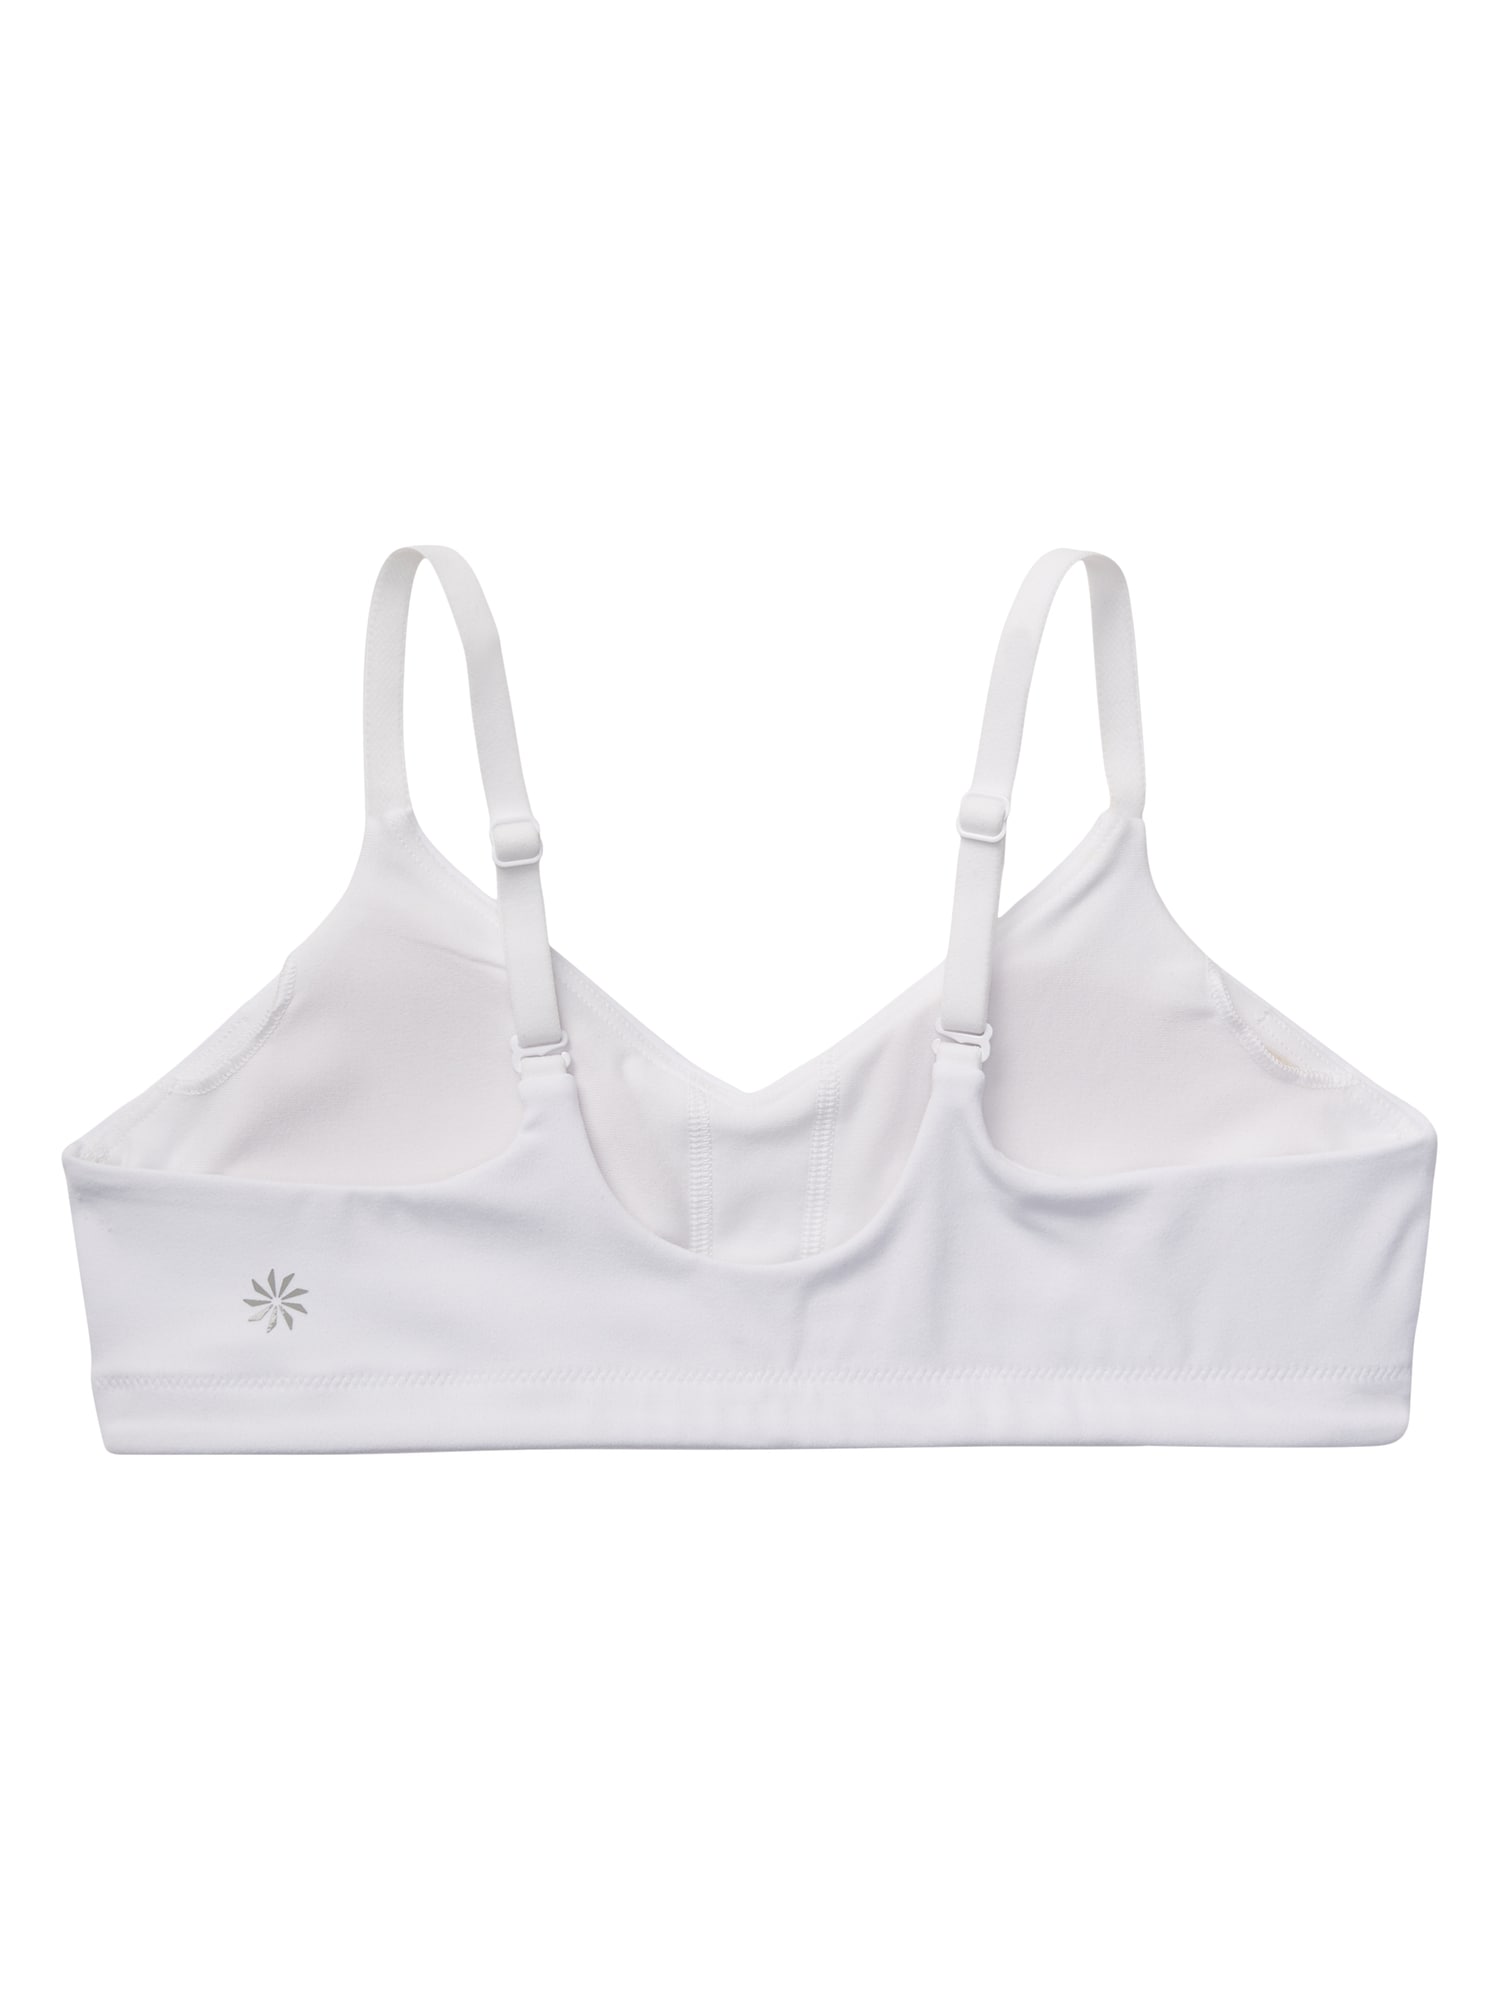 Kinflyte Rise Bra - Max Support - Future White 3XL